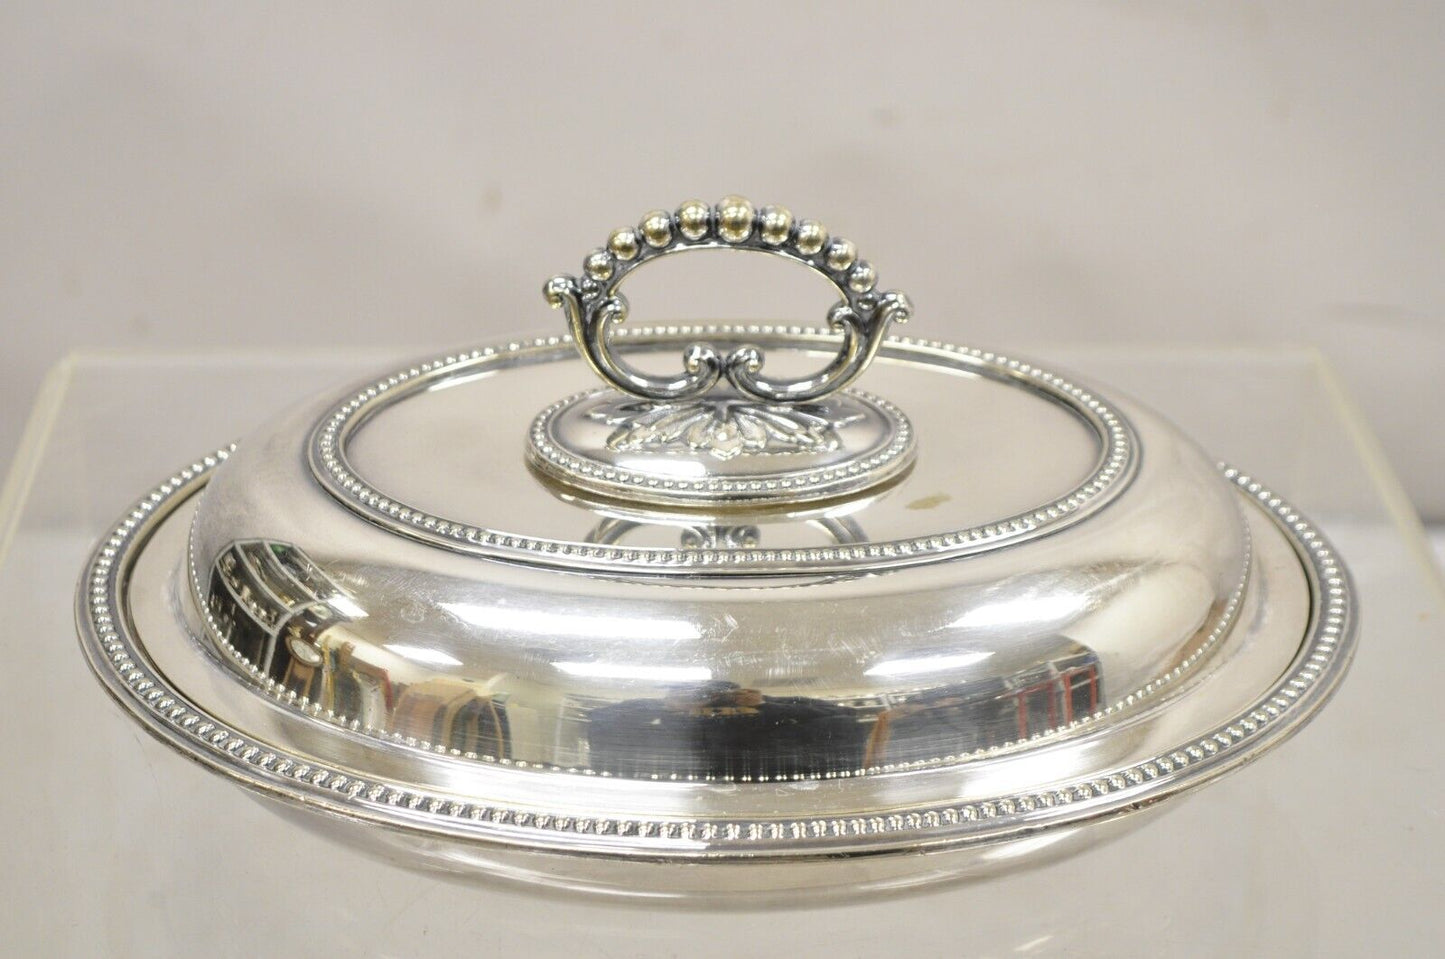 Mappin & Webb's Prince's Plate English Sheffield Silver Plated Covered Dish